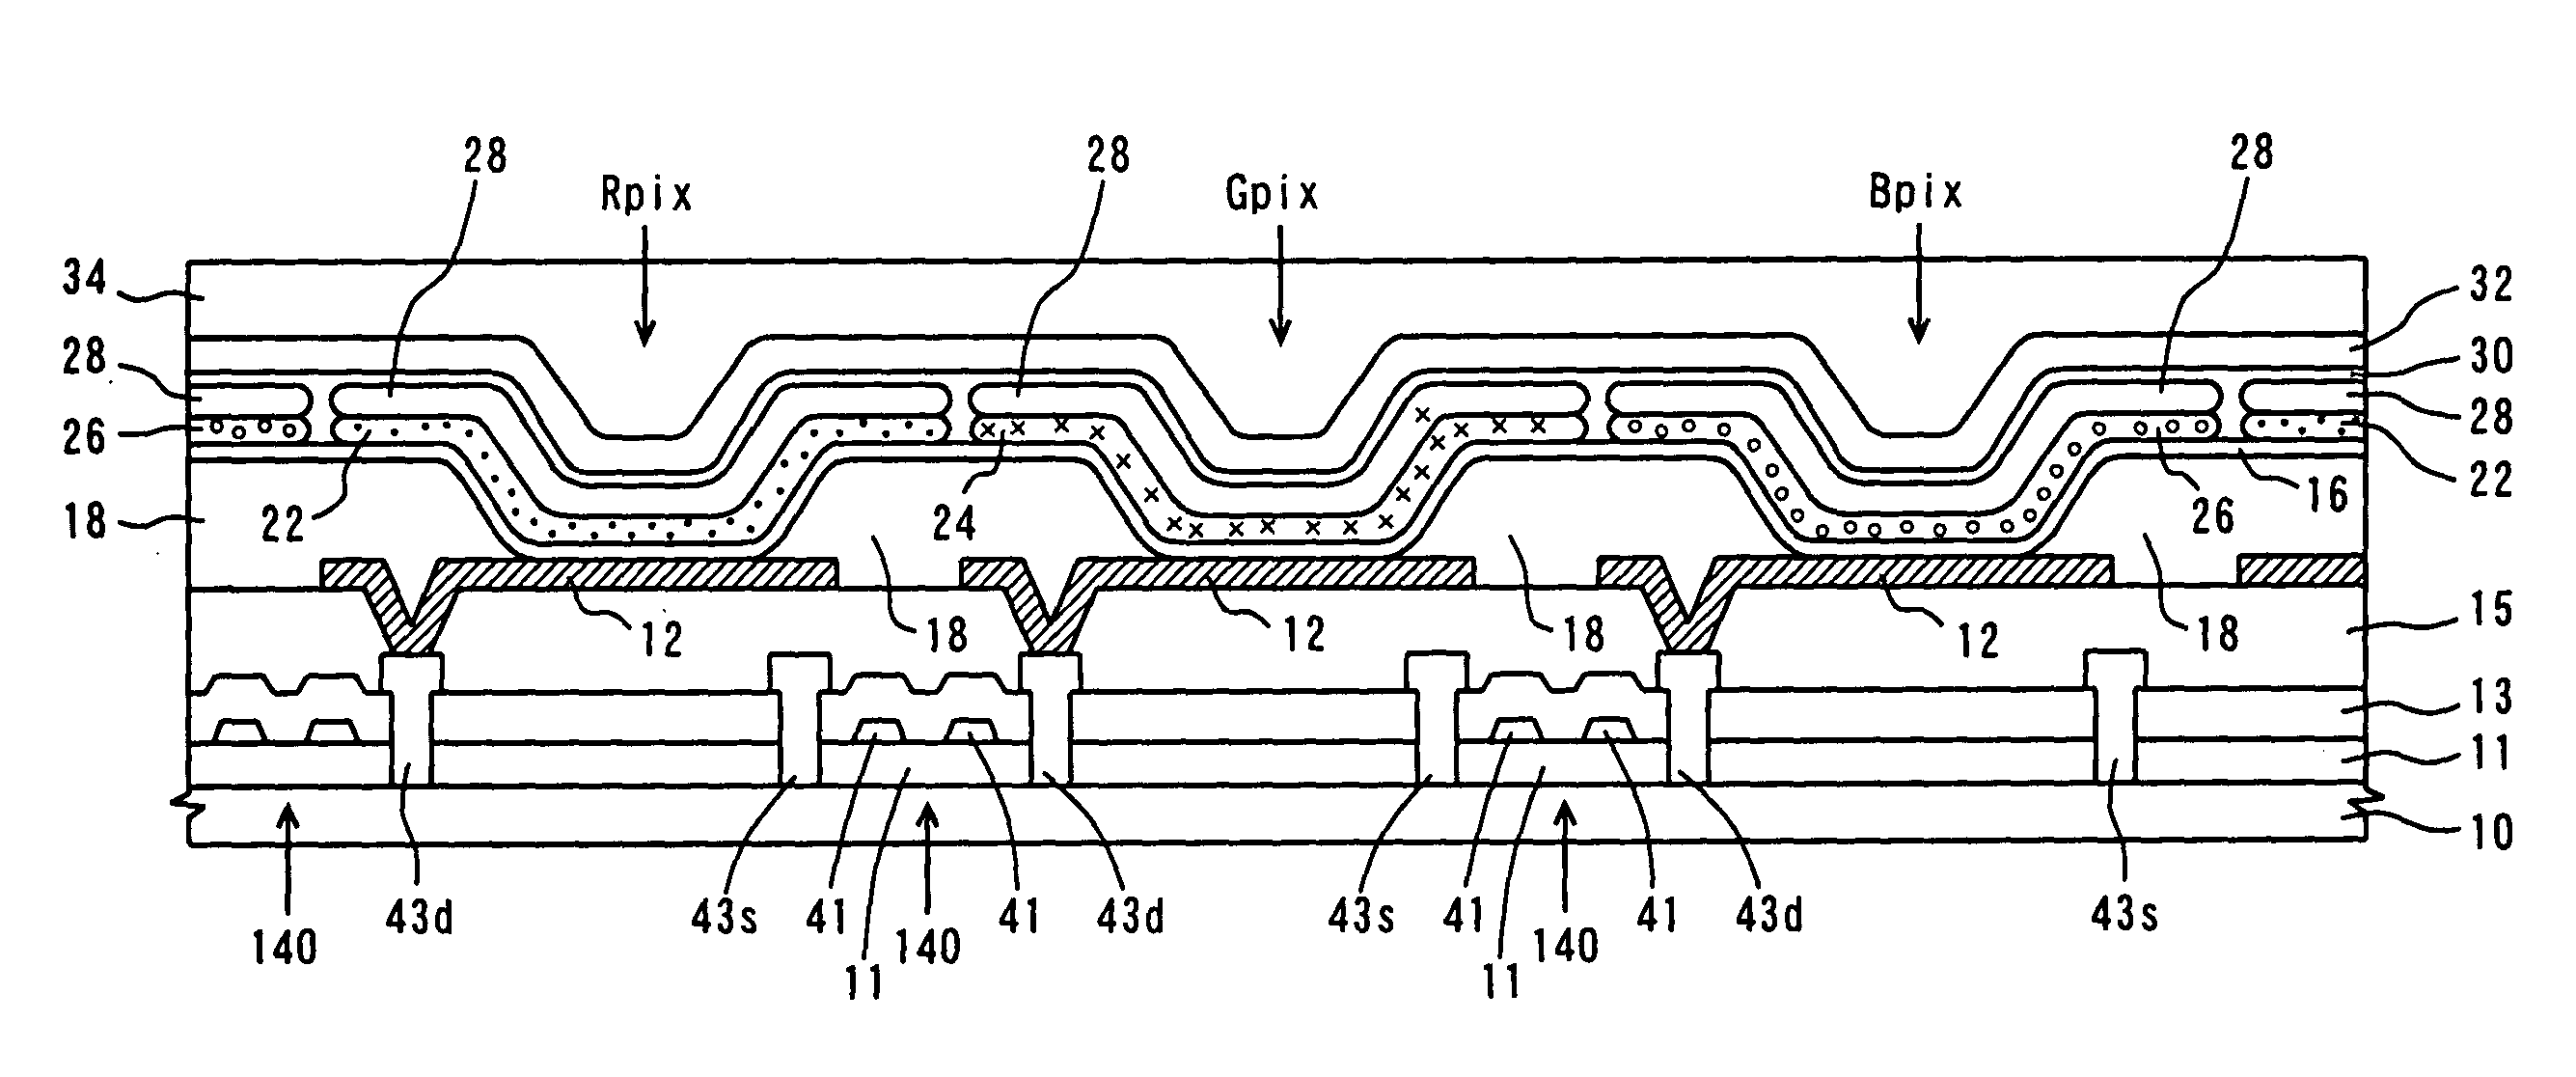 Organic electroluminescent display apparatus and method of fabricating the same